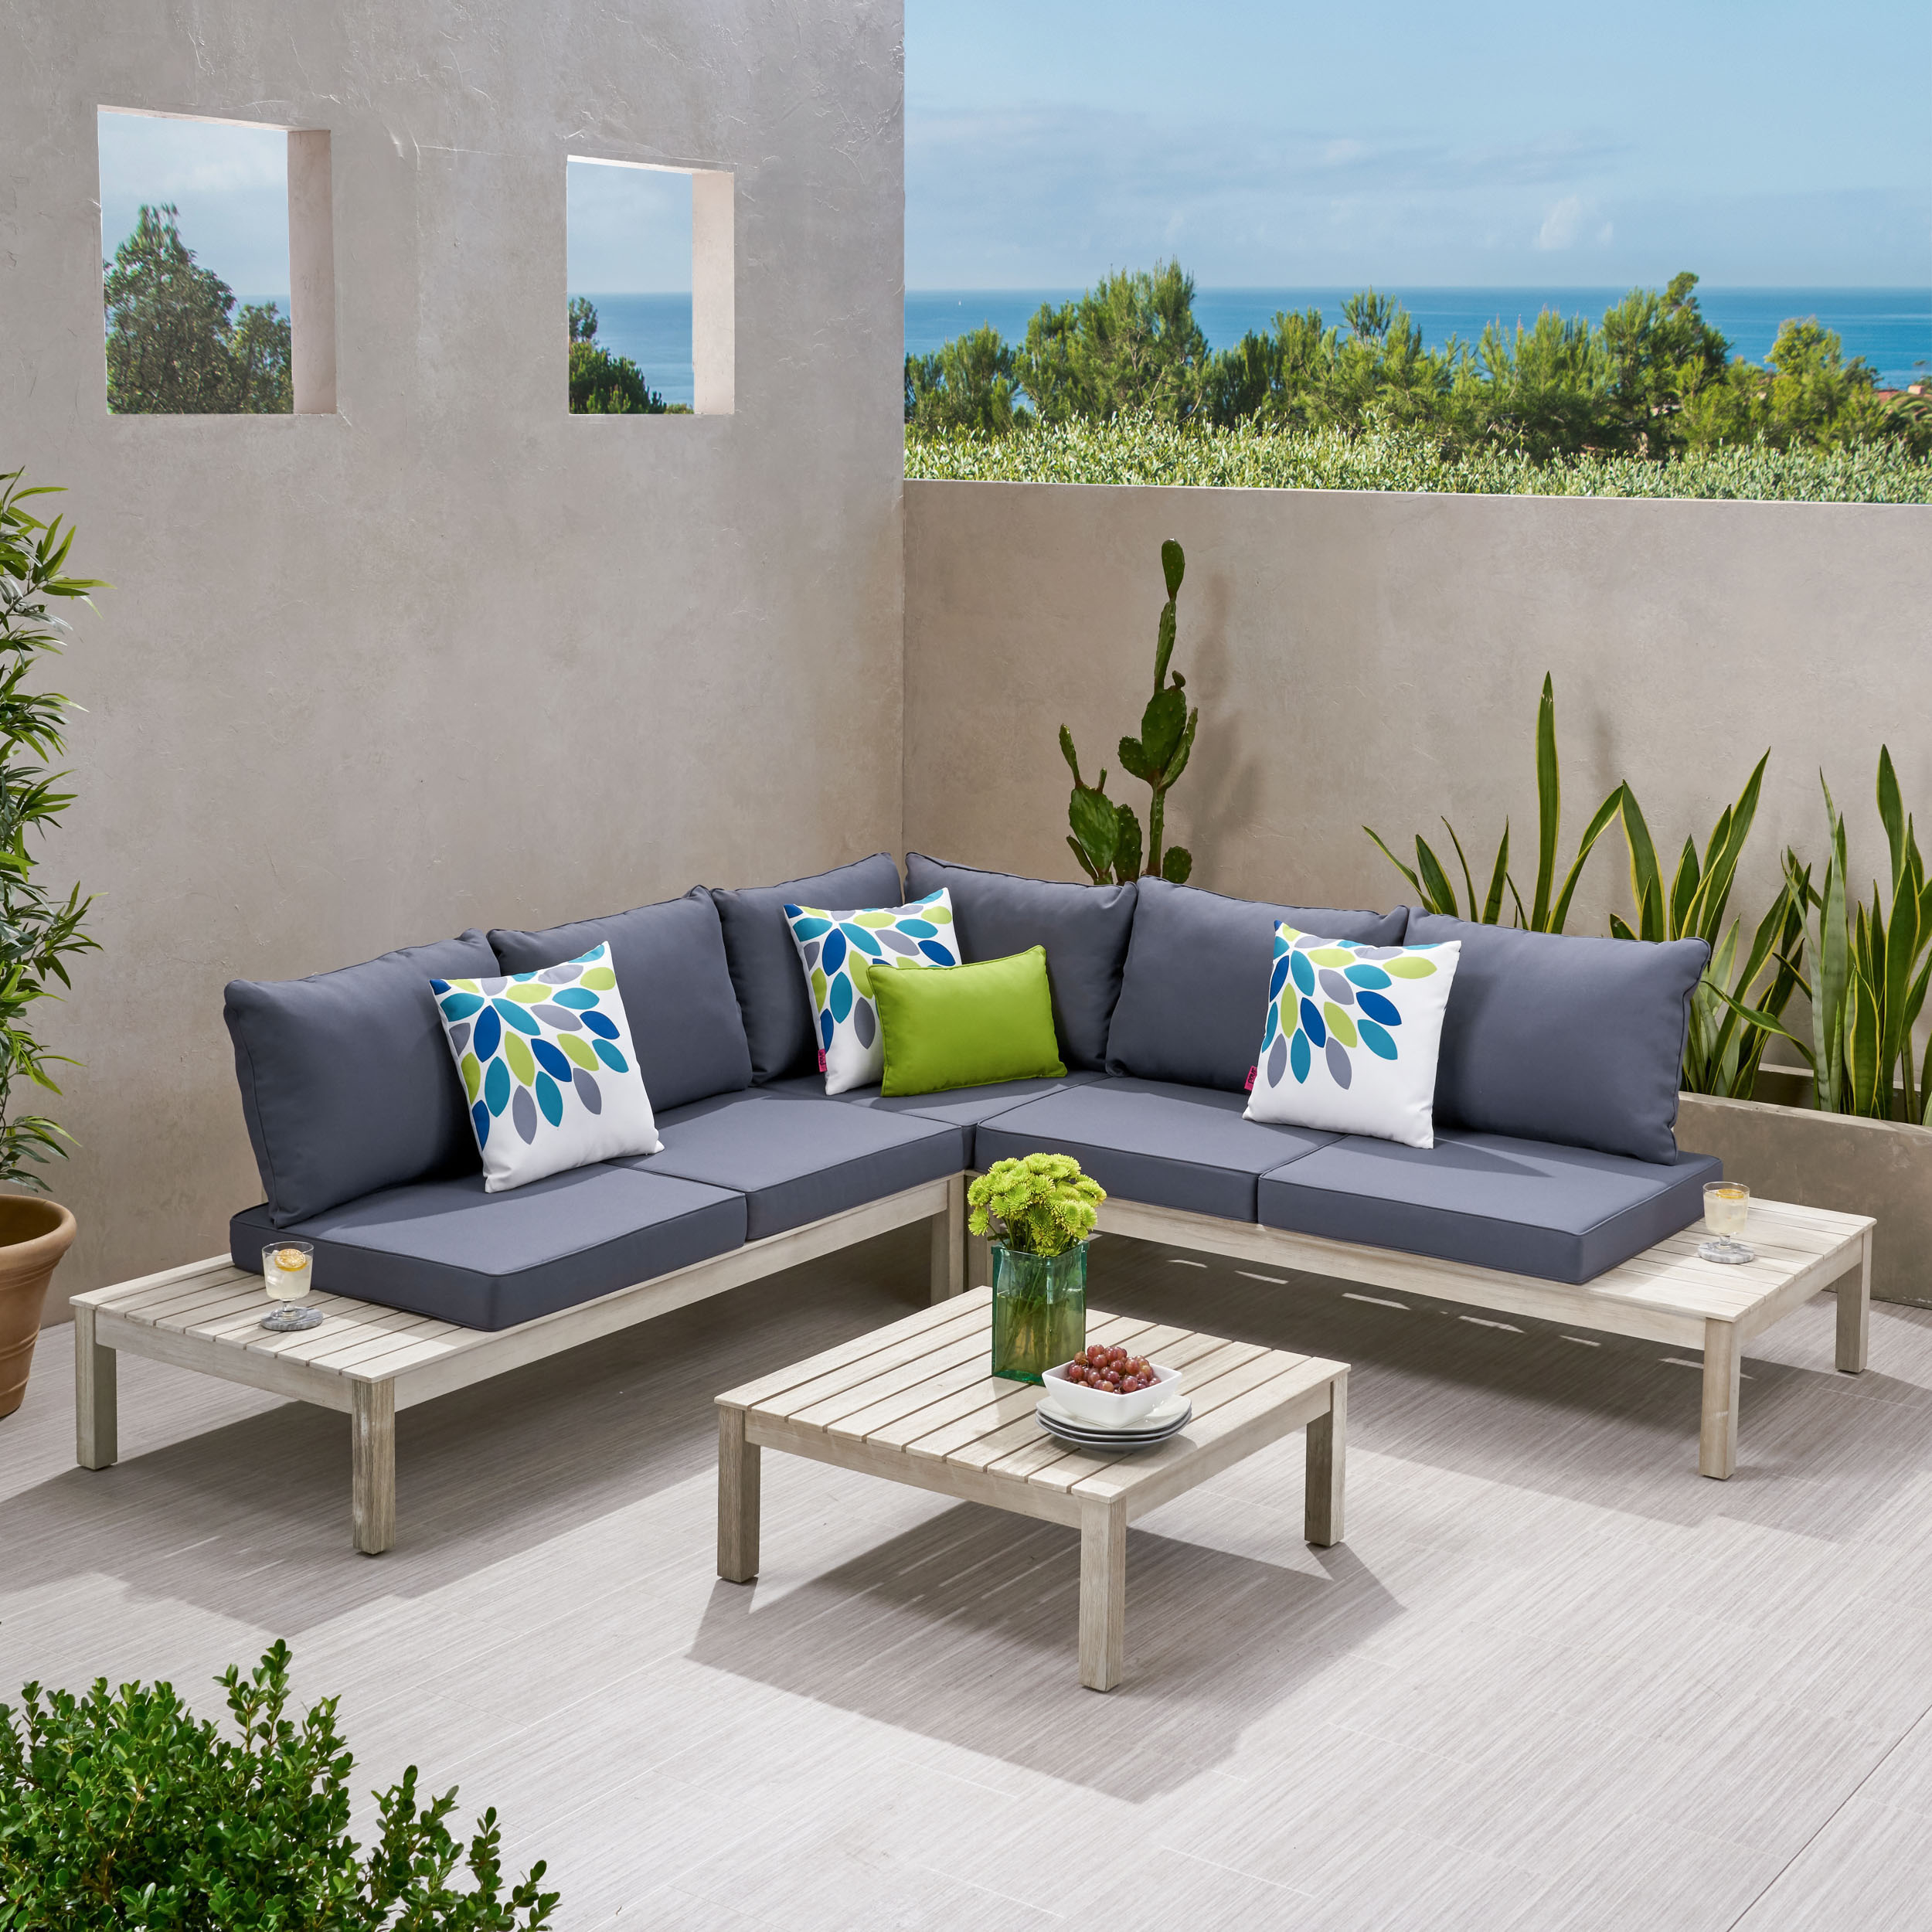 Bunny Outdoor 5 Seater V Shaped Acacia Wood Sectional Sofa Set With Cushions - Weathered Gray + Dark Gray